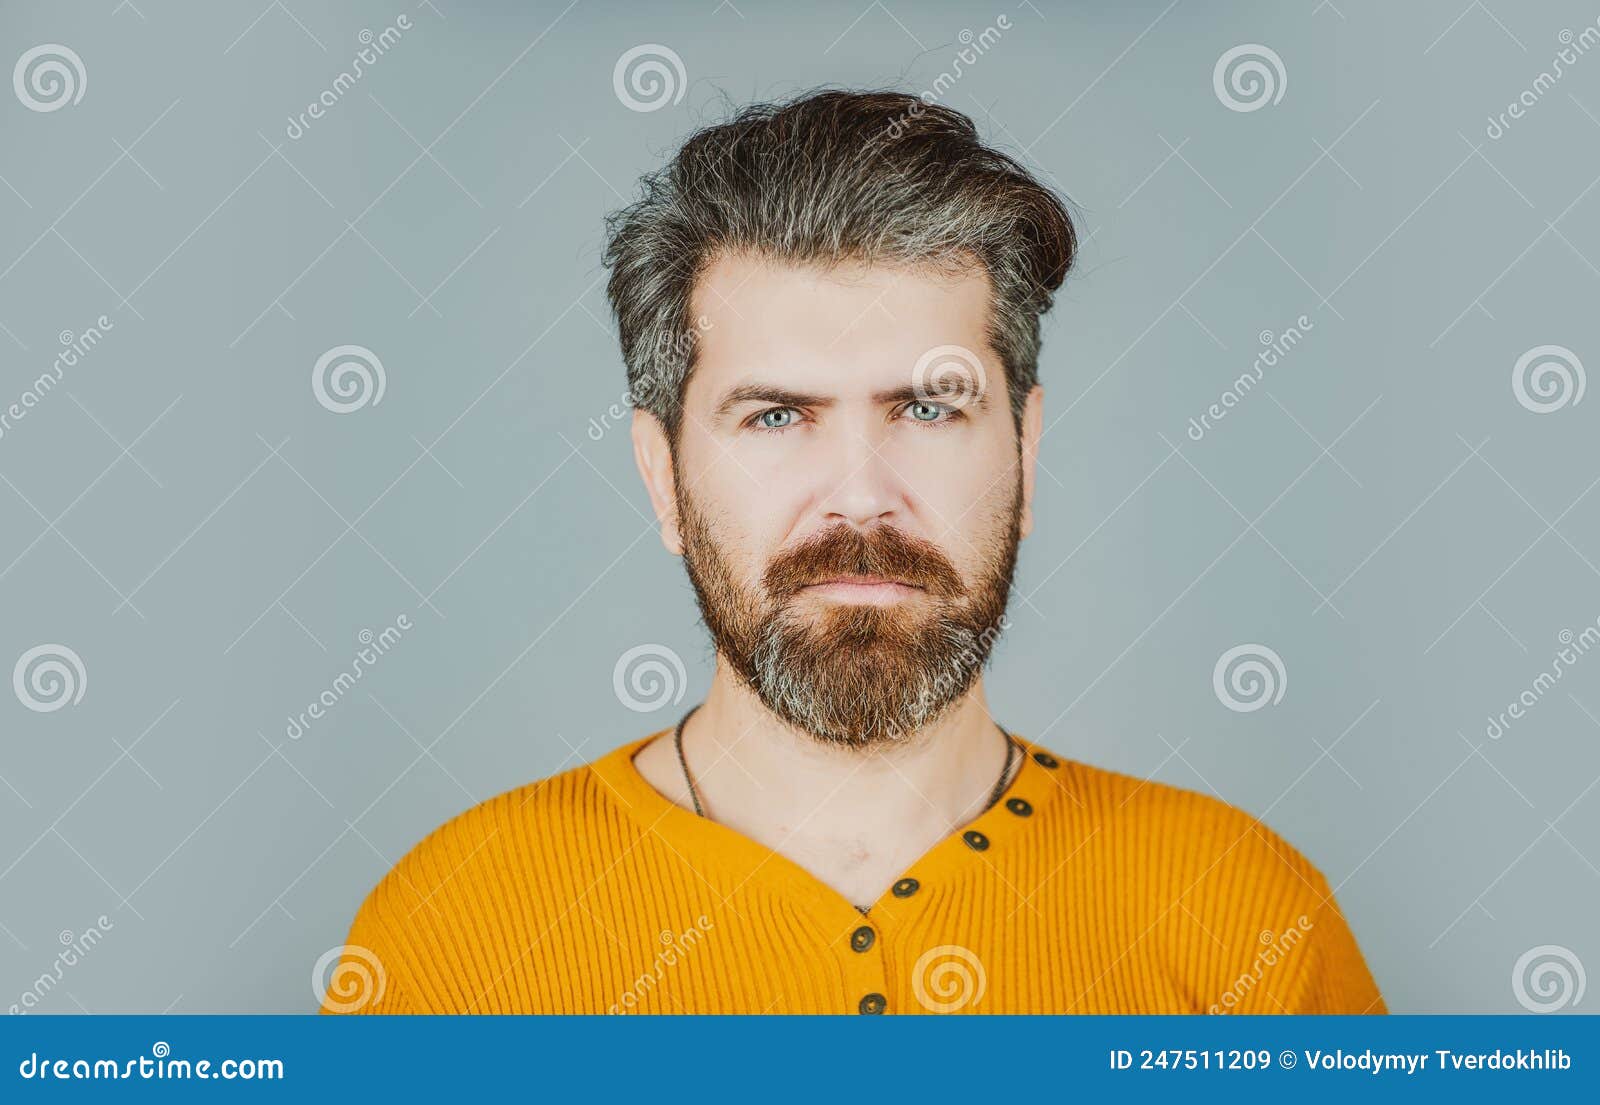 Serious Man Face. Bearded Guy. Human Expression Emotion Concept ...